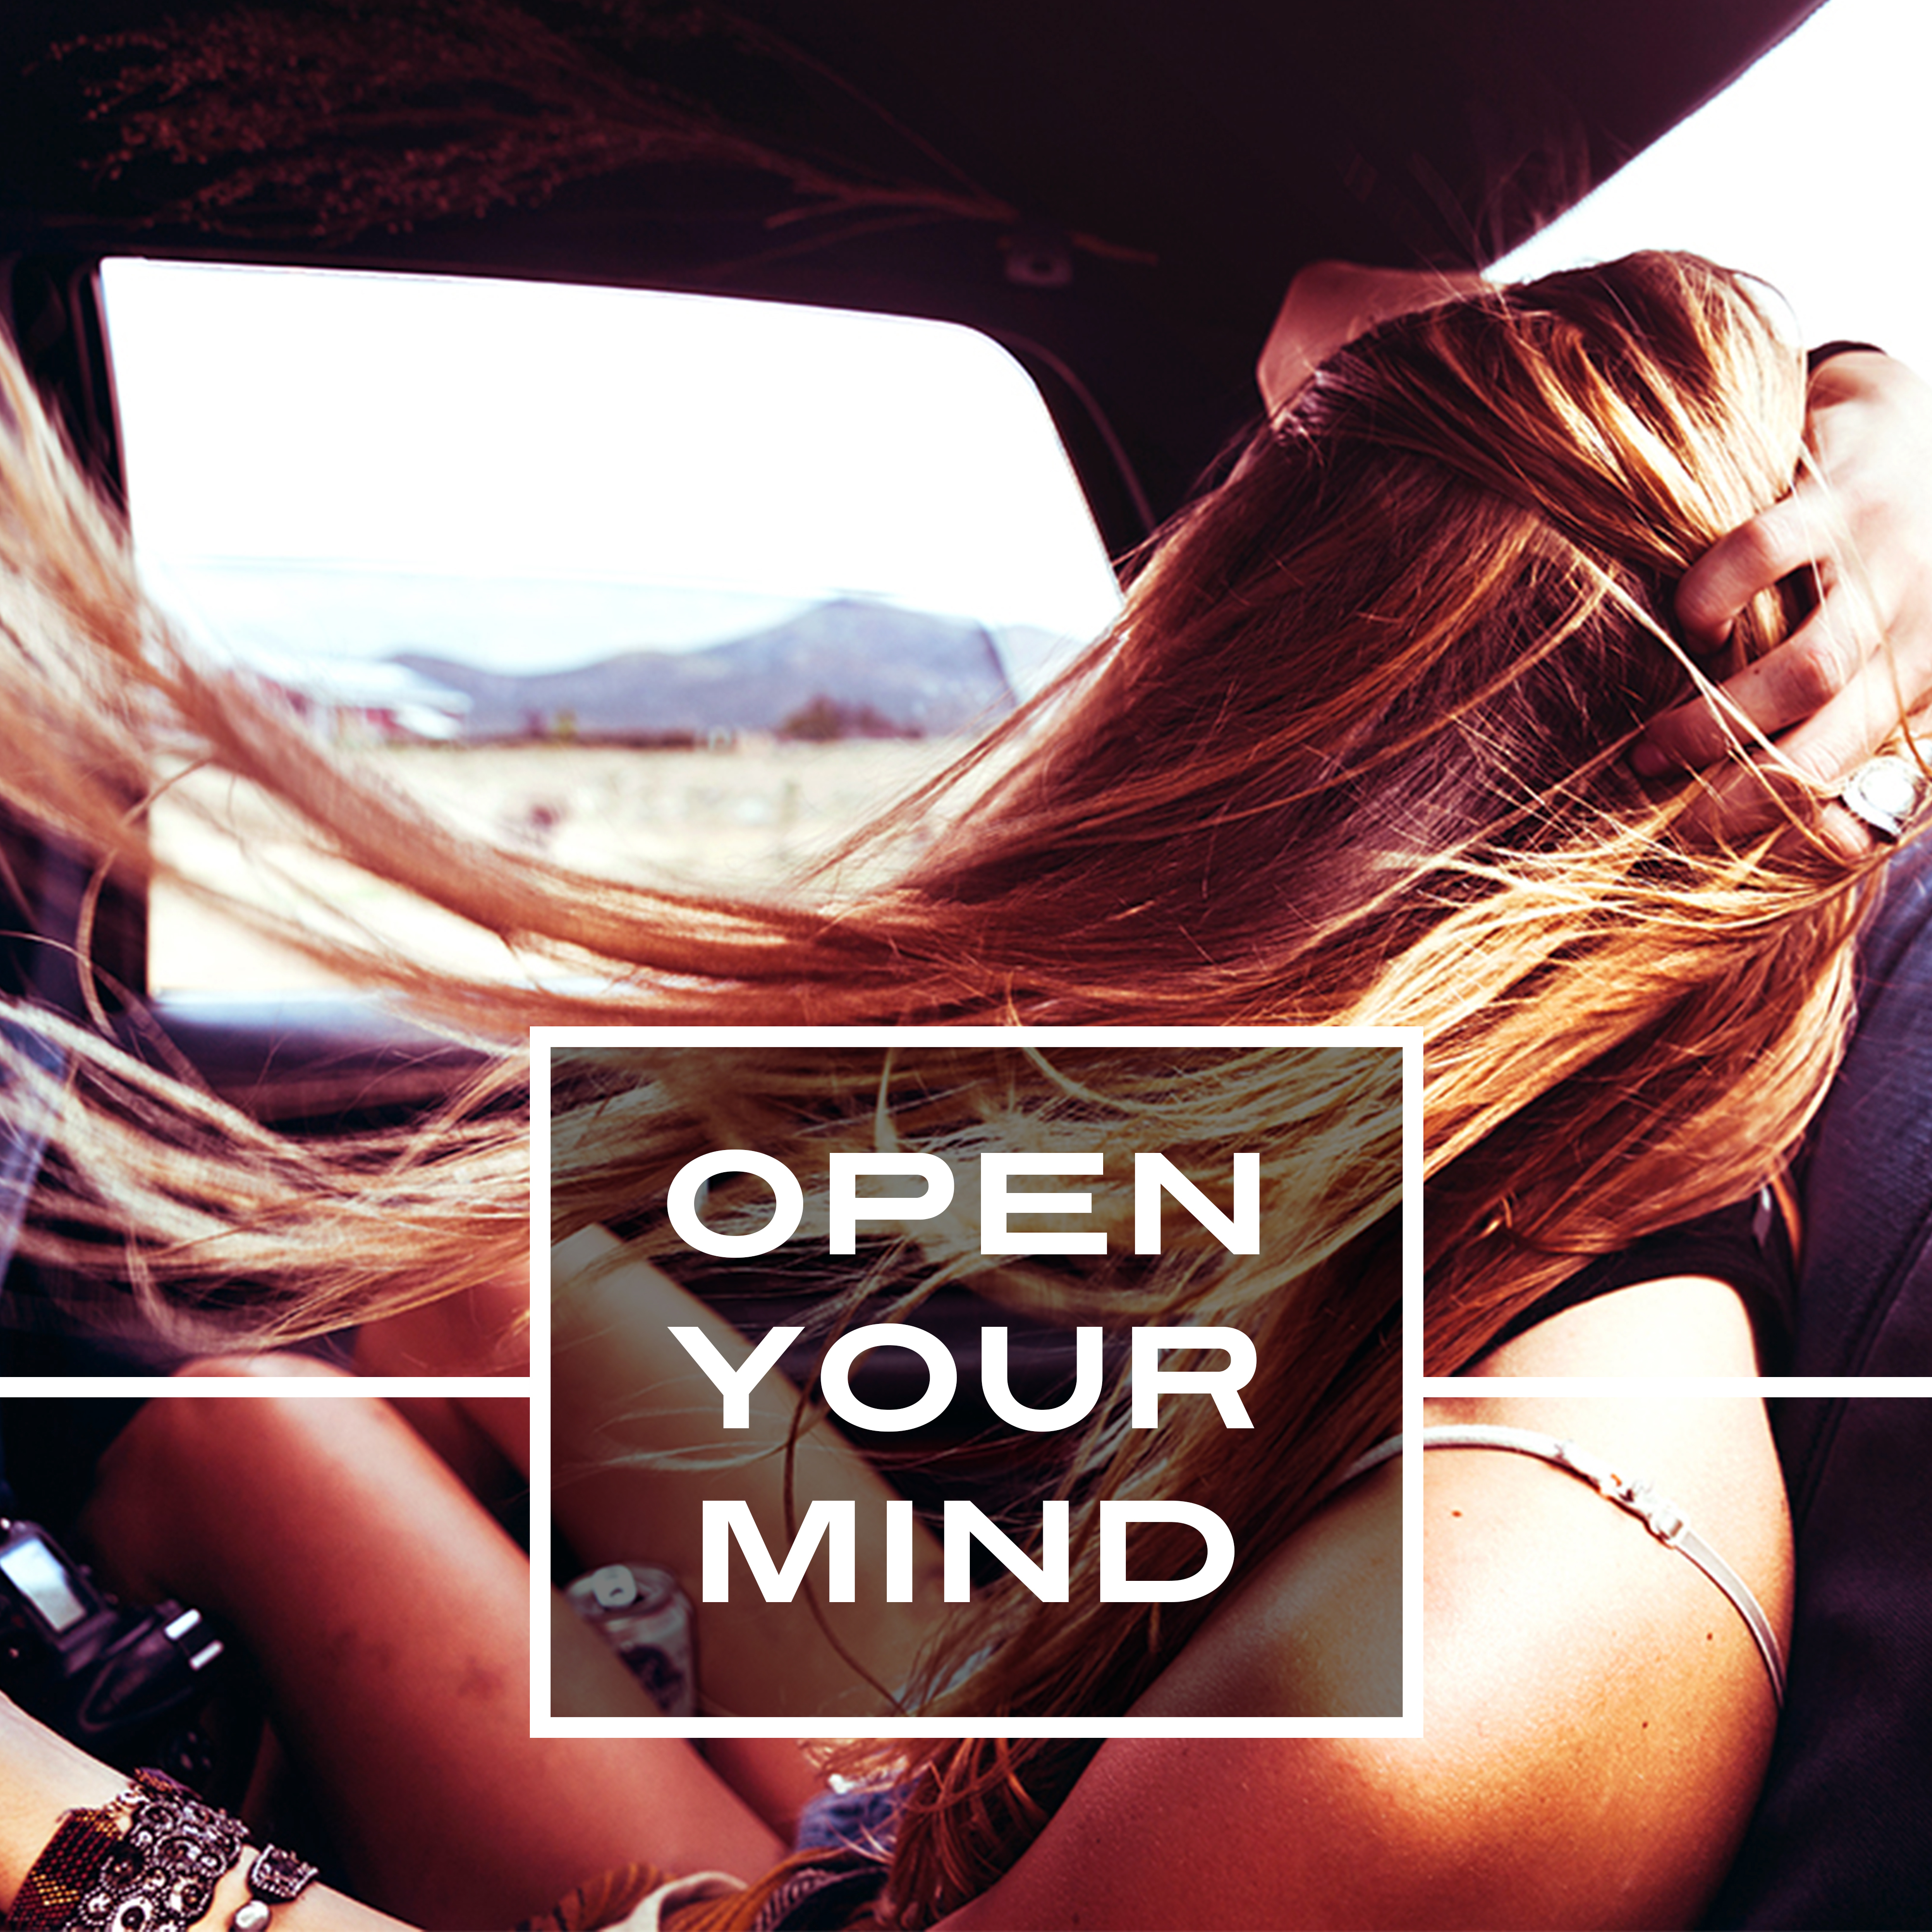 Open Your Mind – Relaxation Sounds, Reiki Healing Music, Serenity and Focus, Sensual Melodies